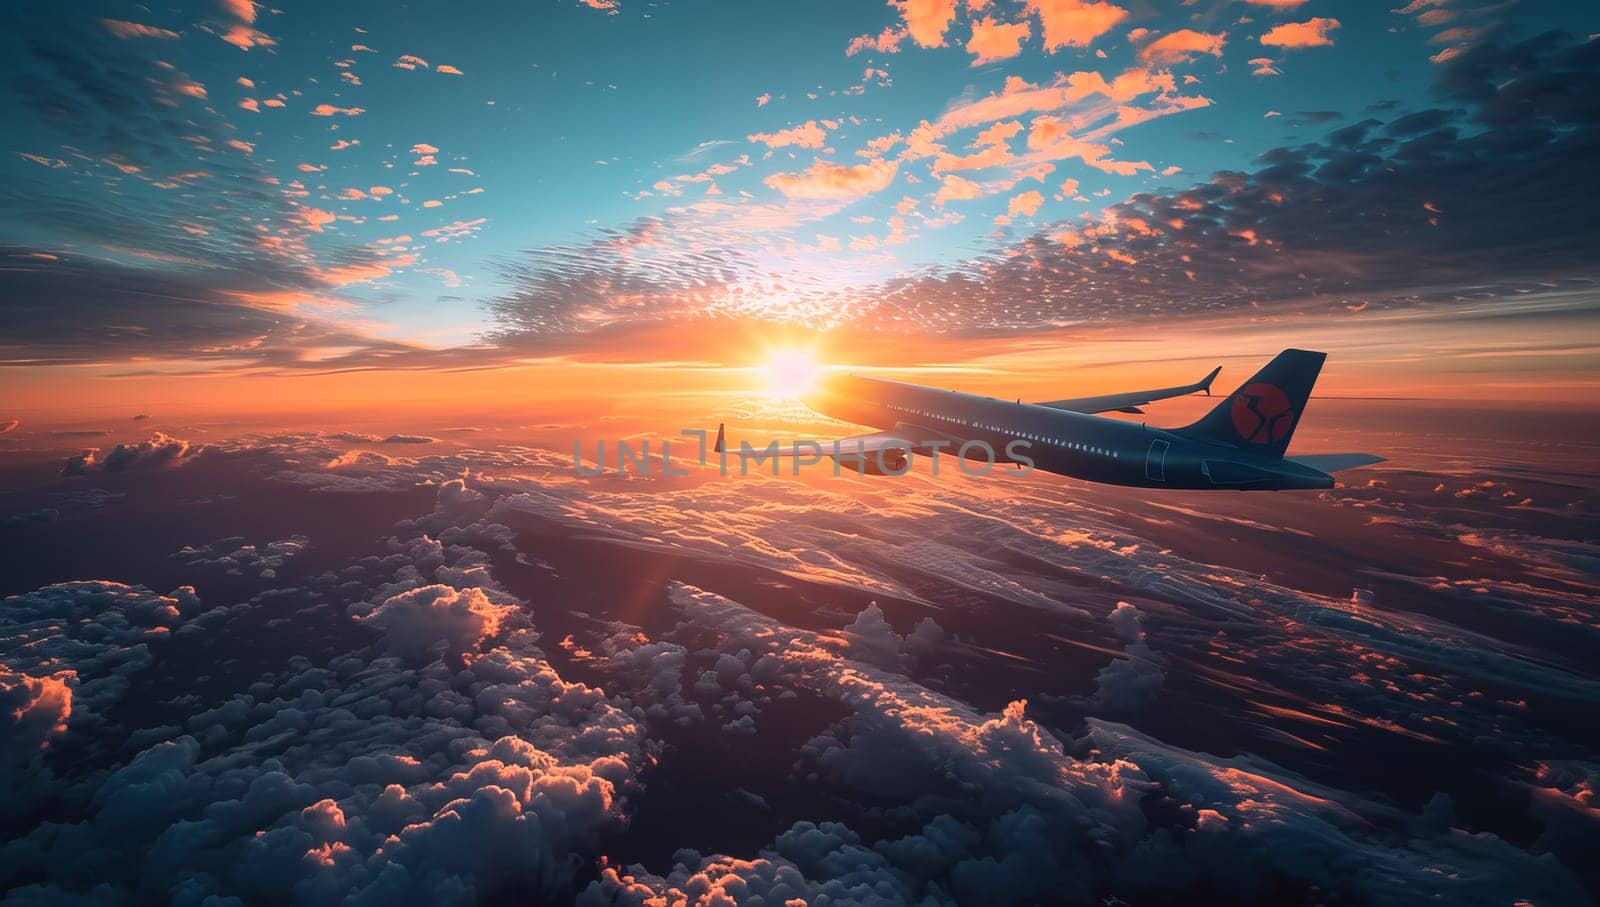 Airplane silhouetted against a vibrant sunset above the clouds